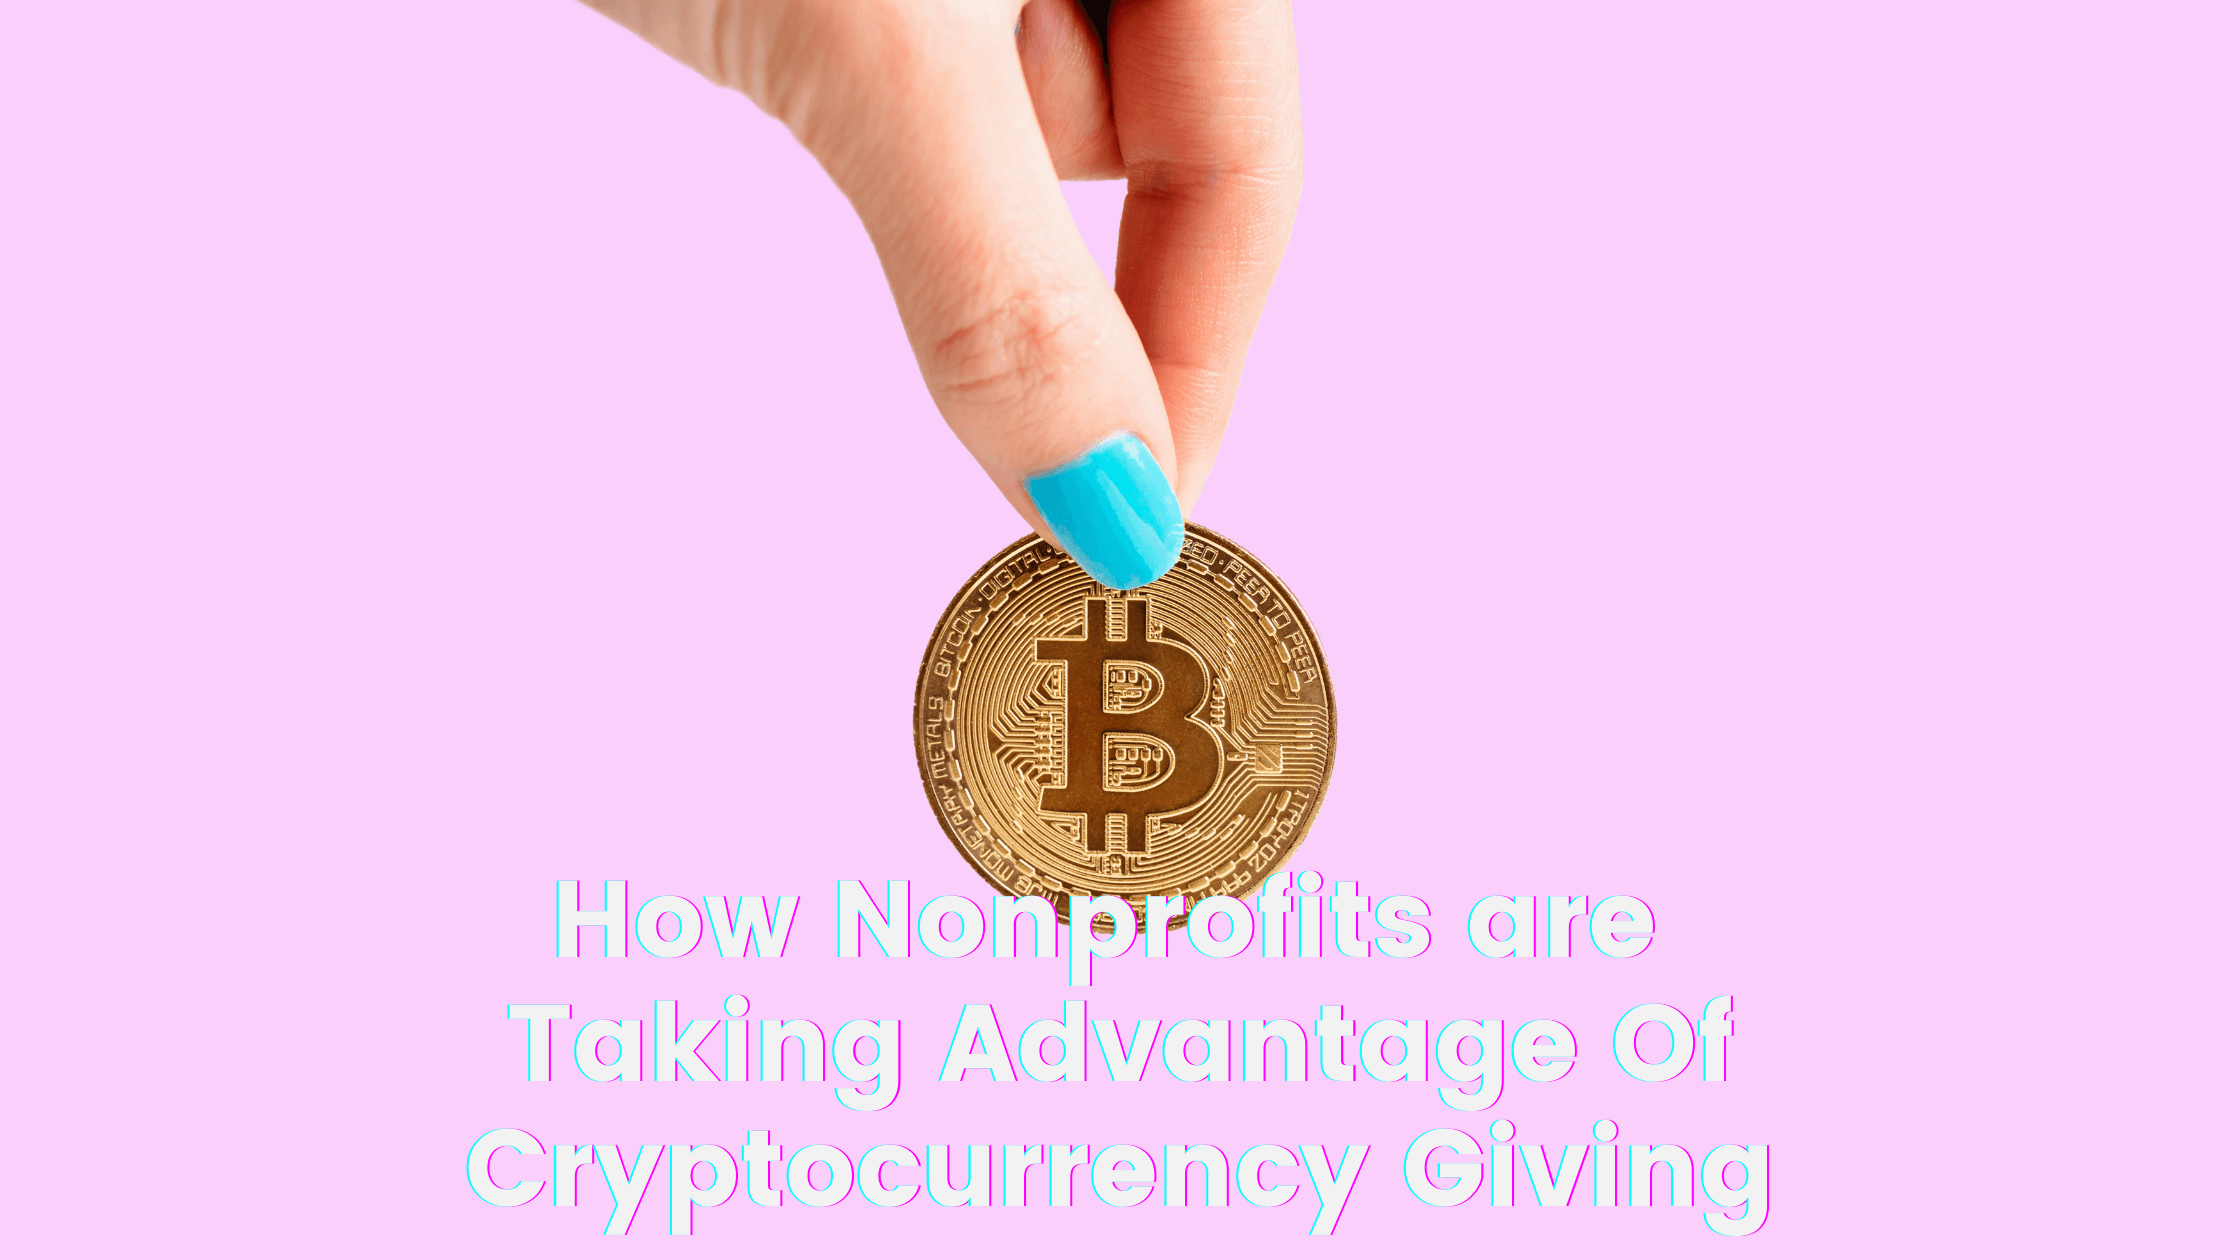 'how nonprofits can take advantage of cryptocurrency giving' with woman holding bitcoin on pink background